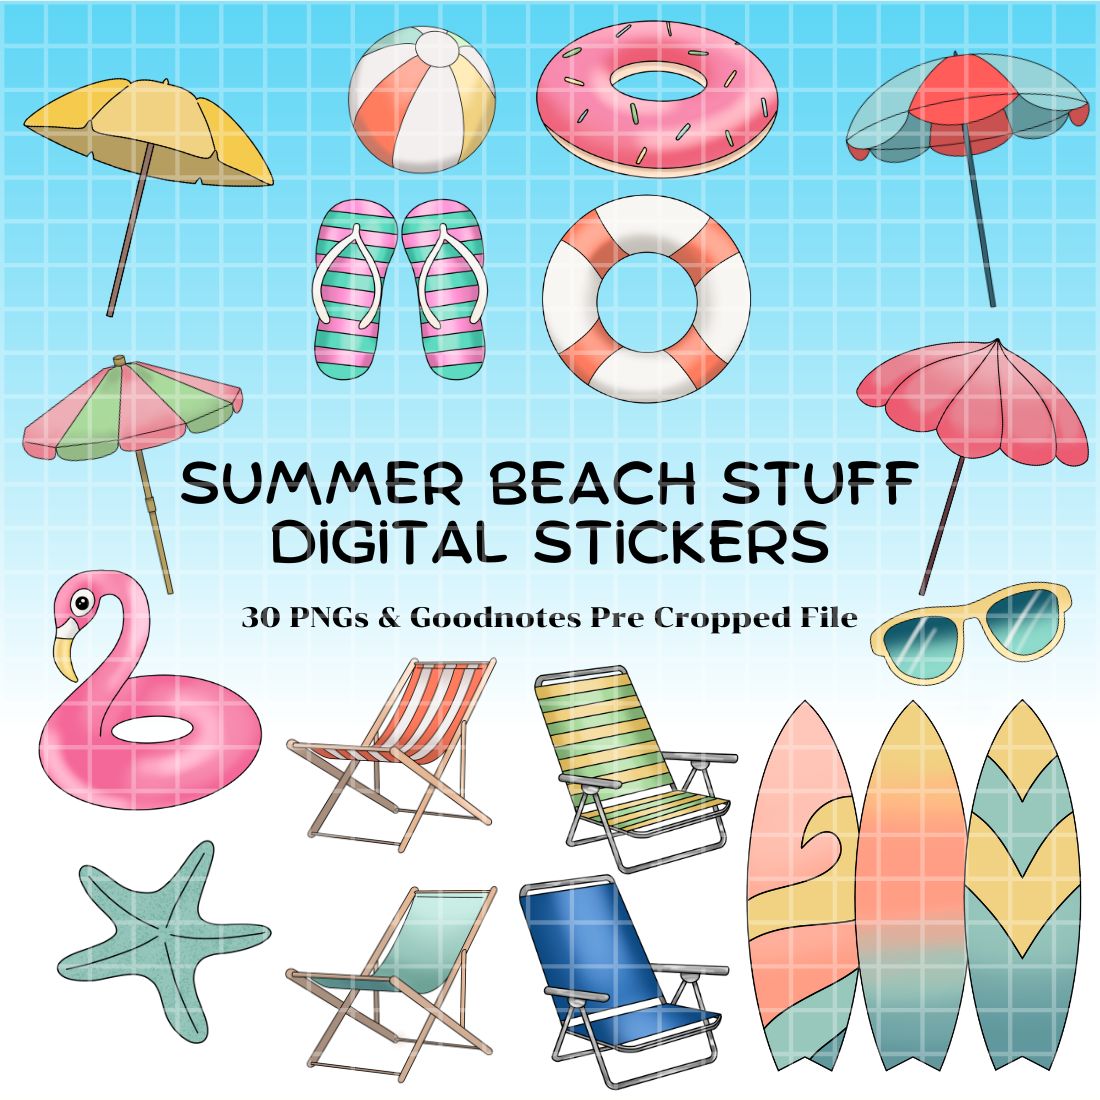 Summer Beach Stuff Digital Stickers - Goodnotes Pre Cropped file & PNG preview image.